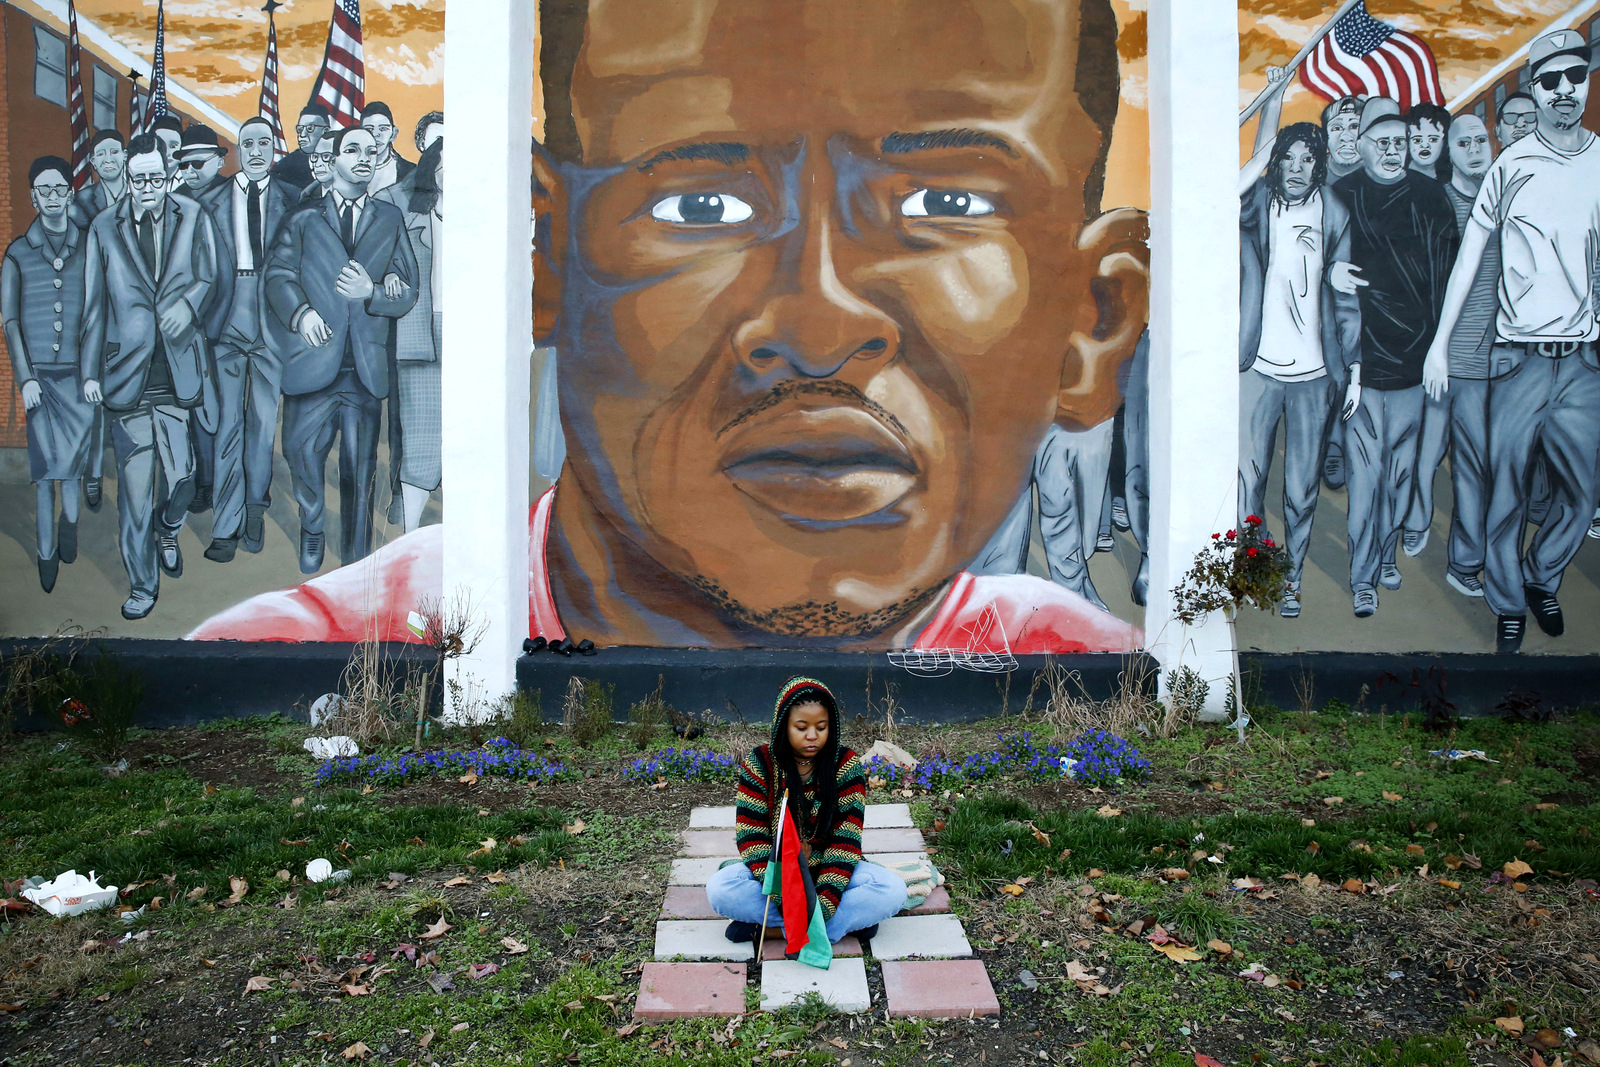 Jazmin Holloway sits below a mural depicting Freddie Gray at the intersection of his arrest, in Baltimore. Gray’s family agreed to a $6.4 million settlement with the city in September 2015. (AP/Patrick Semansky)